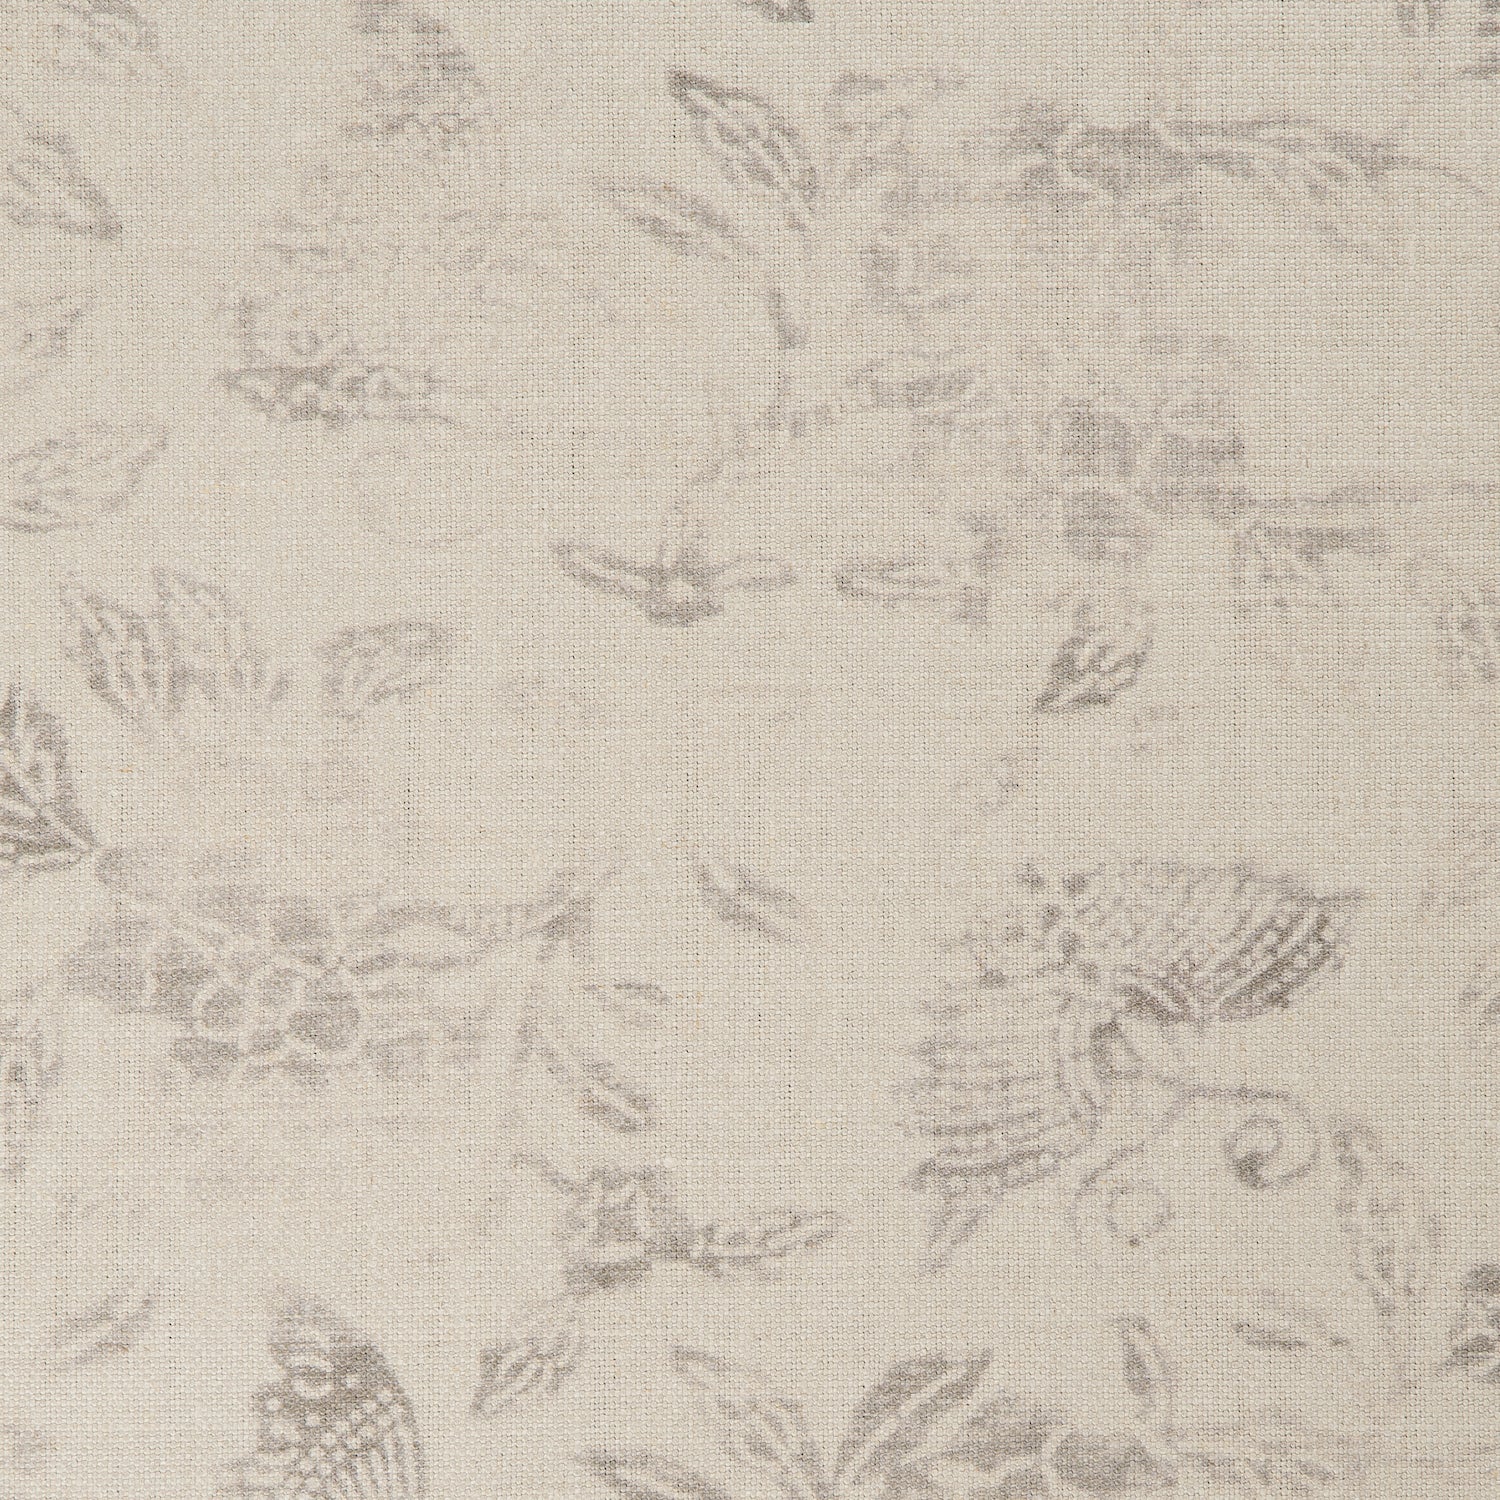 Detail of a printed linen fabric in a repeating flower and butterfly pattern in misty brown on a cream field.